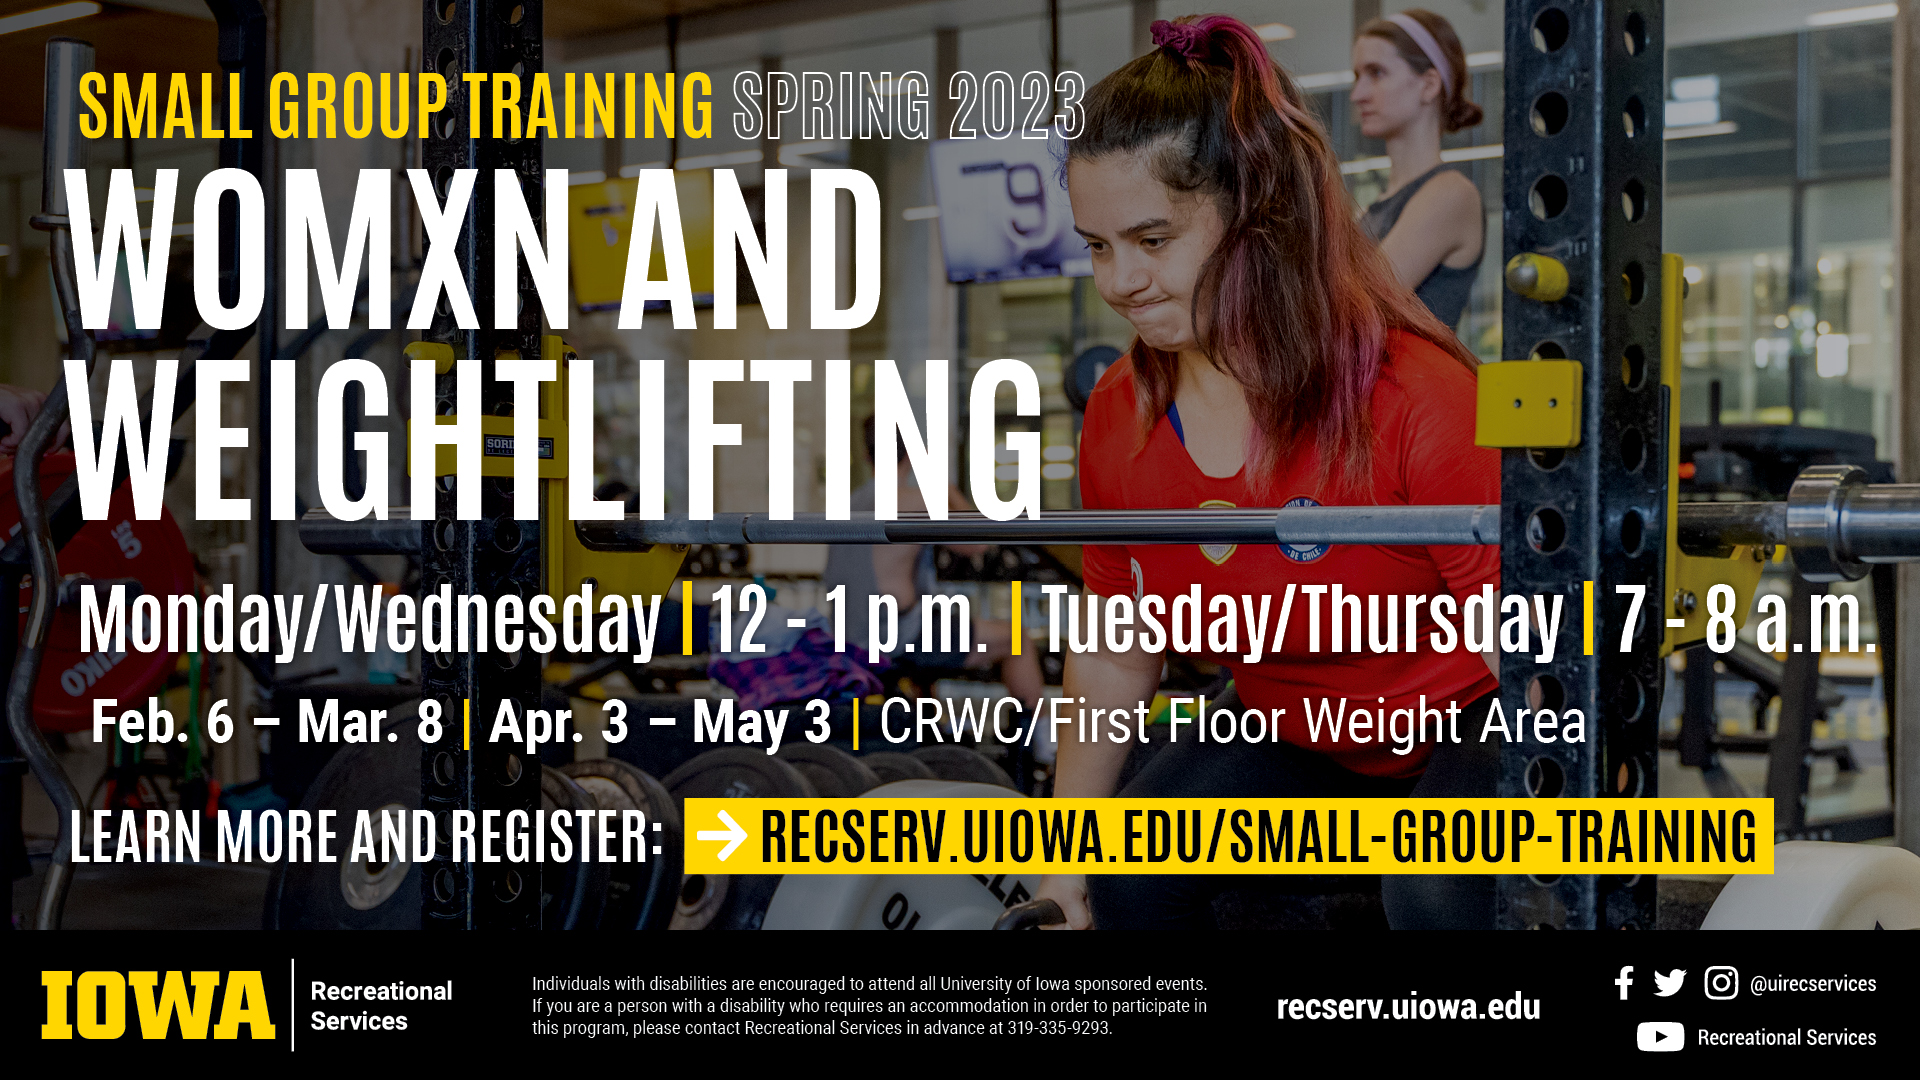 Small Group Training Spring 2023 Womxn and Weightlifting Monday/Wednesday 12-1pm, Tues/Thurs 7-8am Feb 6-March 8, April 3-May 3 Learn more and register: recserv.uiowa.edu/small-group-training